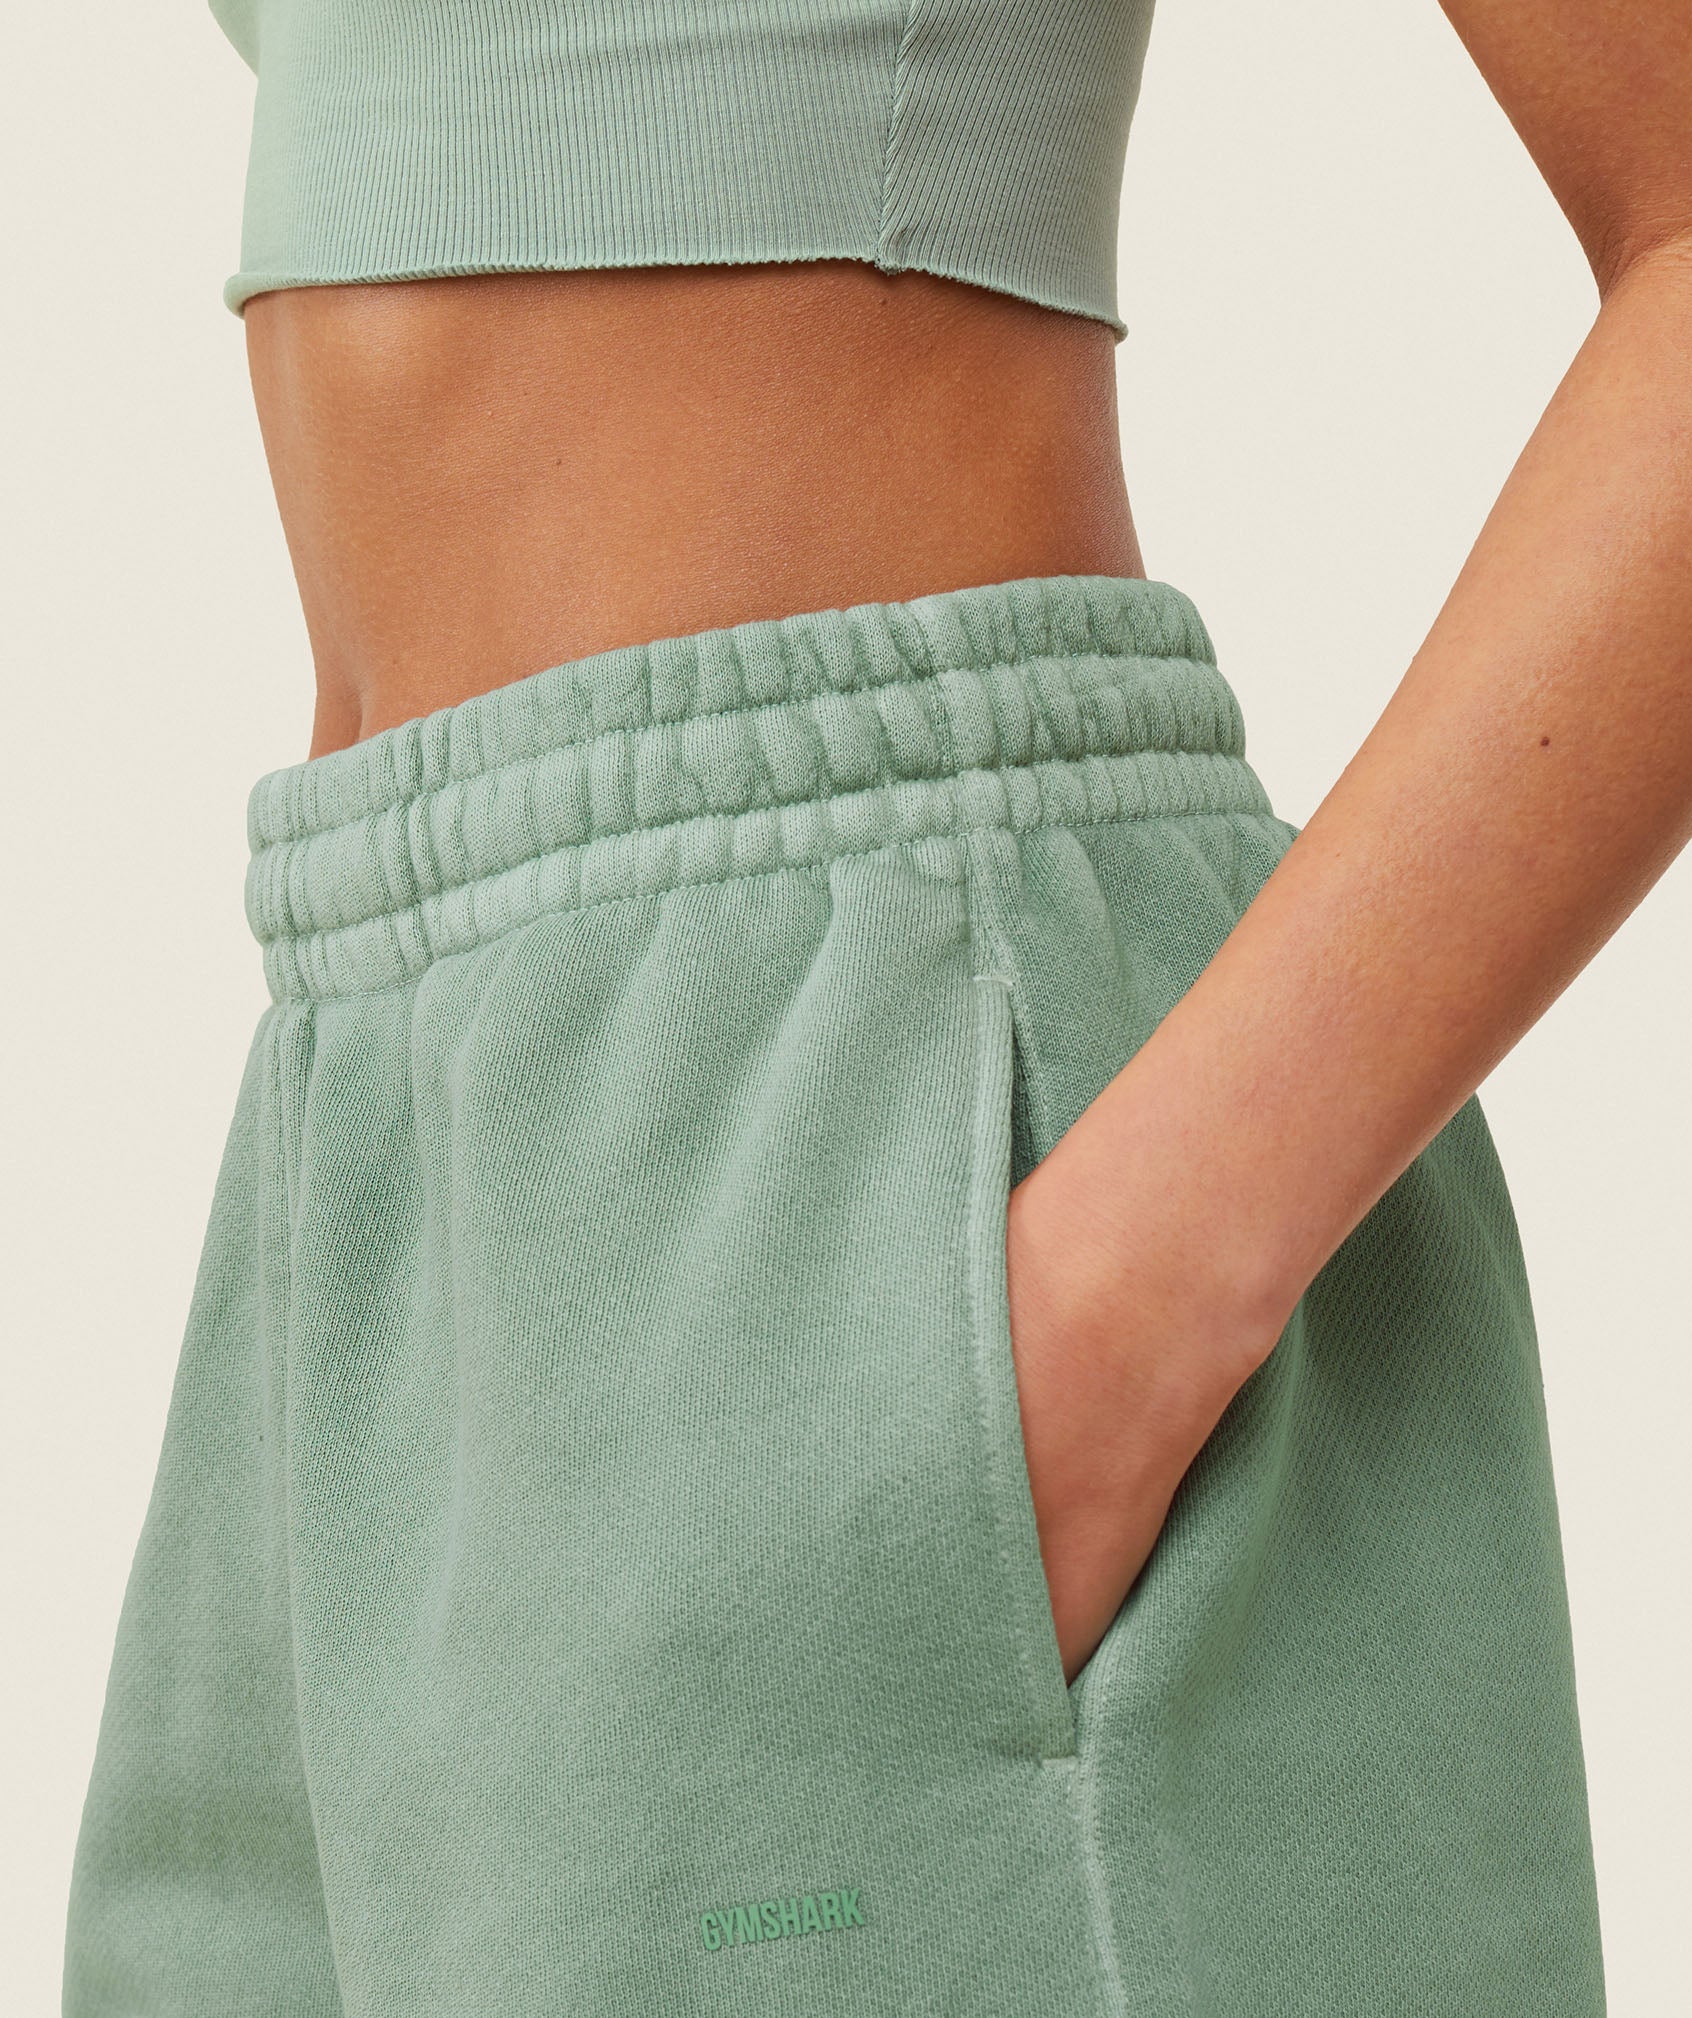 everywear Relaxed Sweat Shorts in Dollar Green - view 5